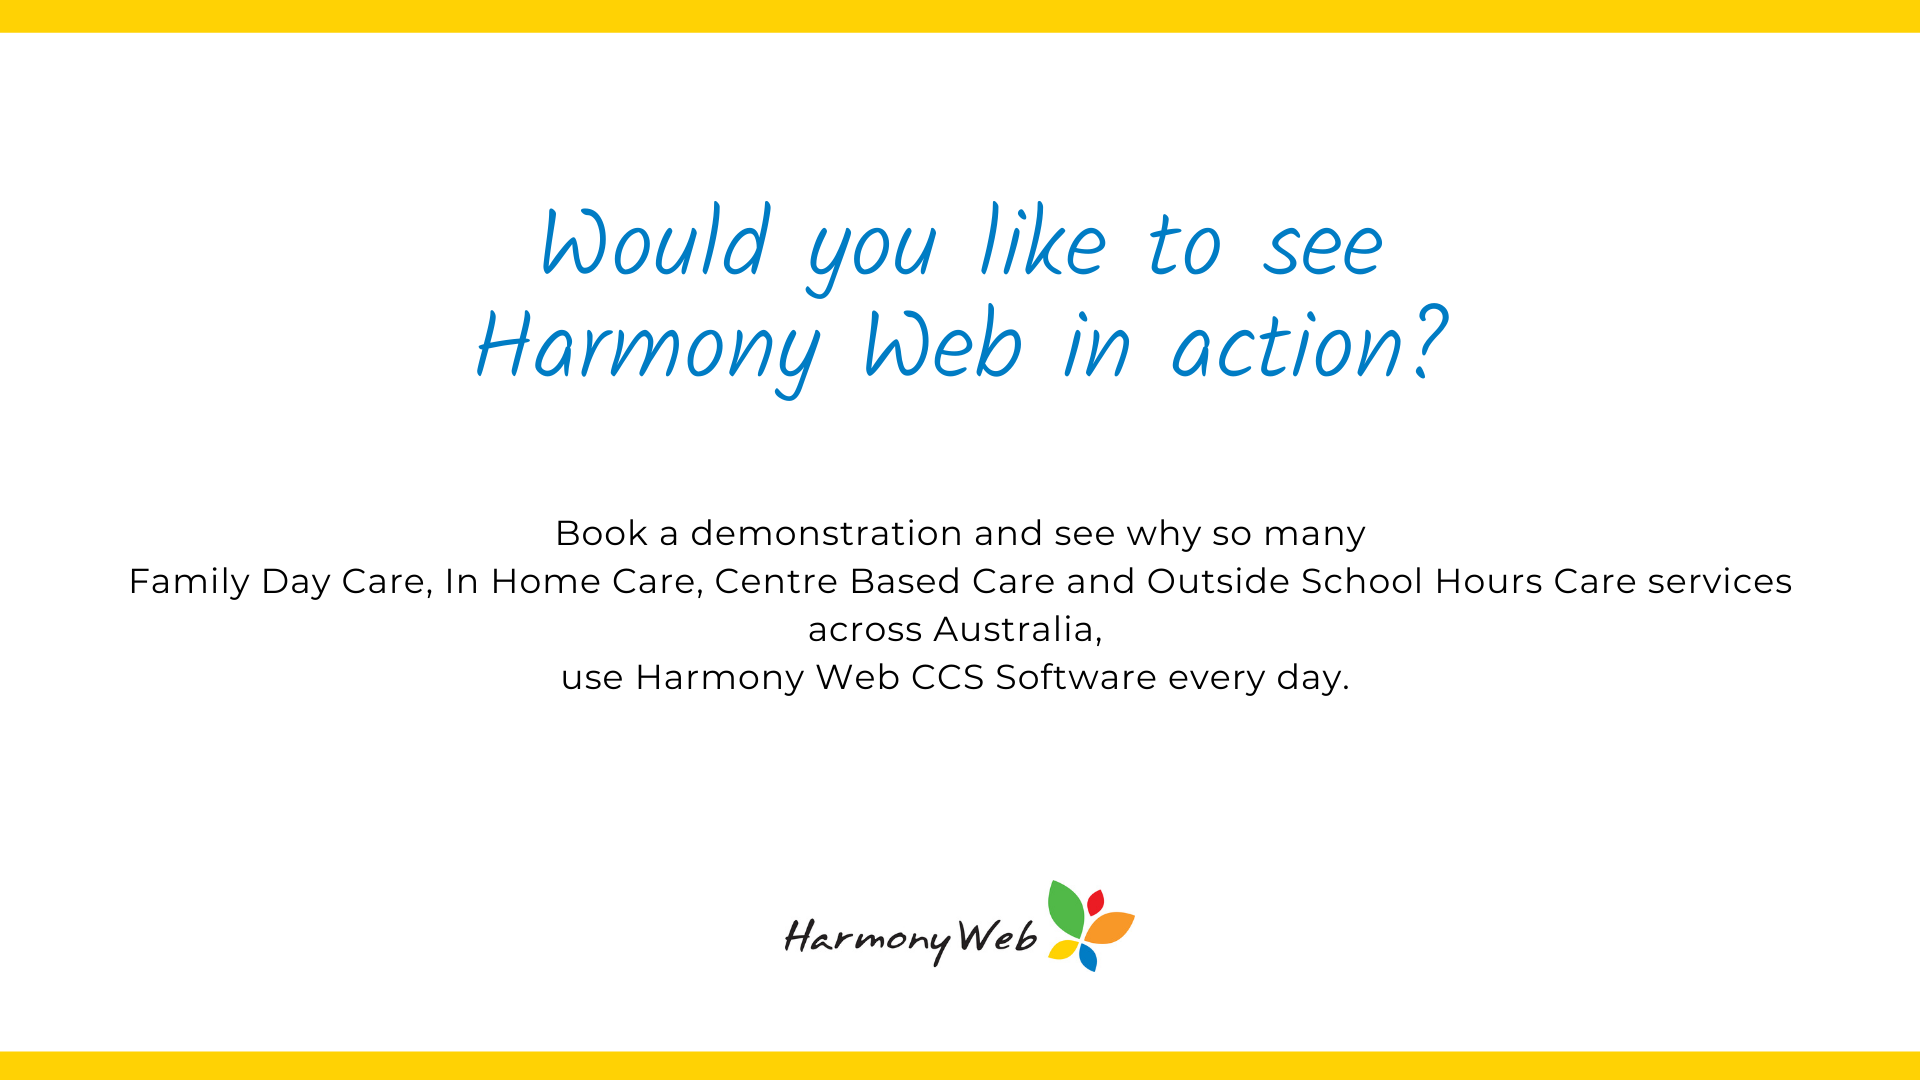 Book a demonstration of Harmony Web